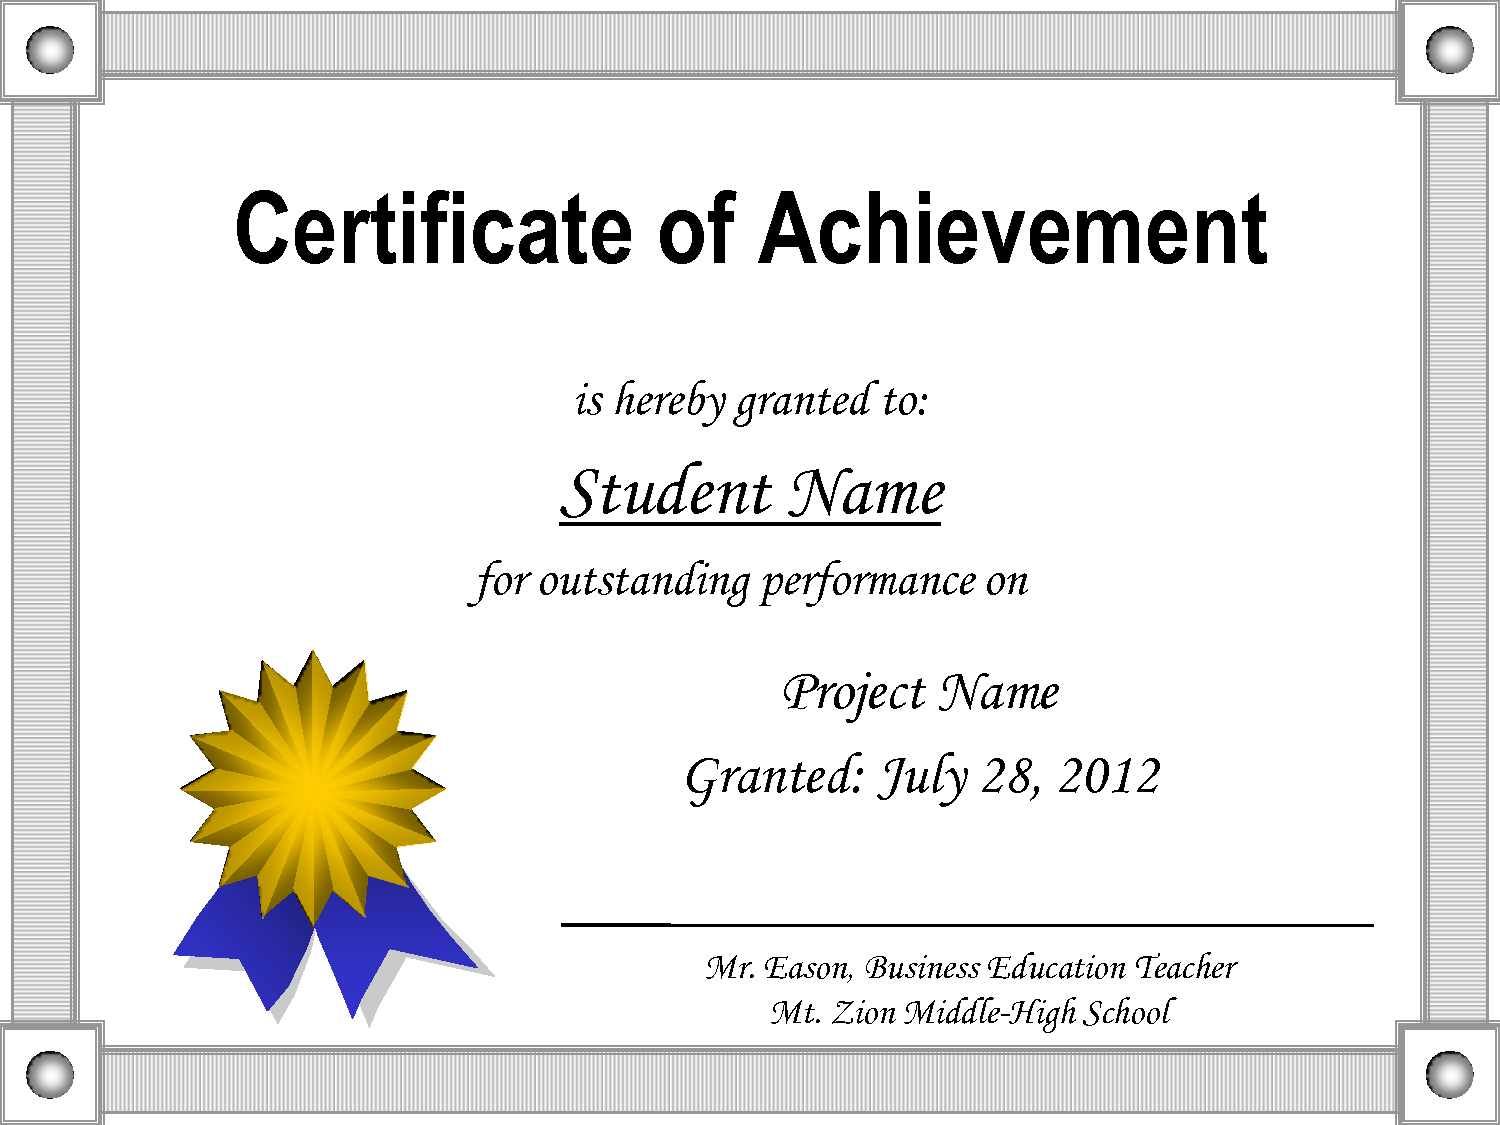 Achievement Certificate Template Free - Cerescoffee.co Pertaining To Certificate Of Accomplishment Template Free